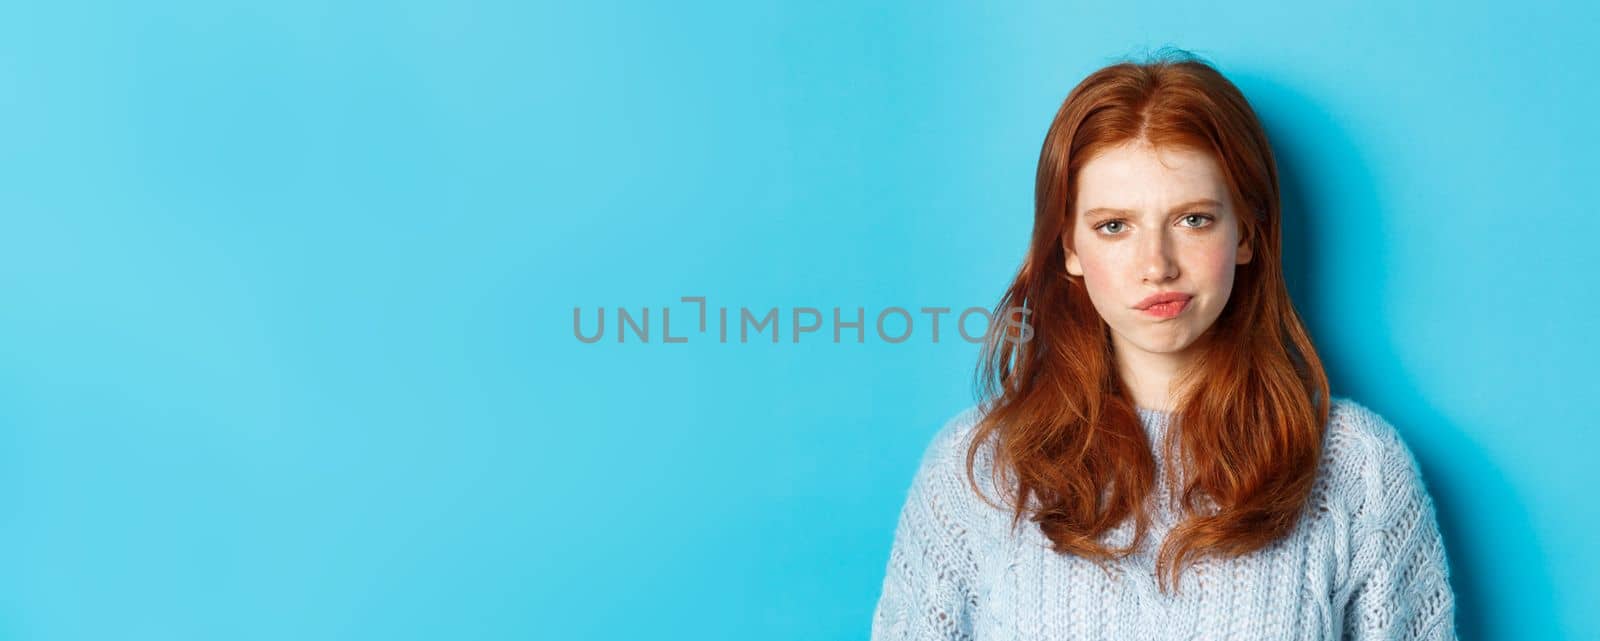 Disappointed teenage girl with red hair, frowning and smirking displeased, looking judgemental, standing against blue background.